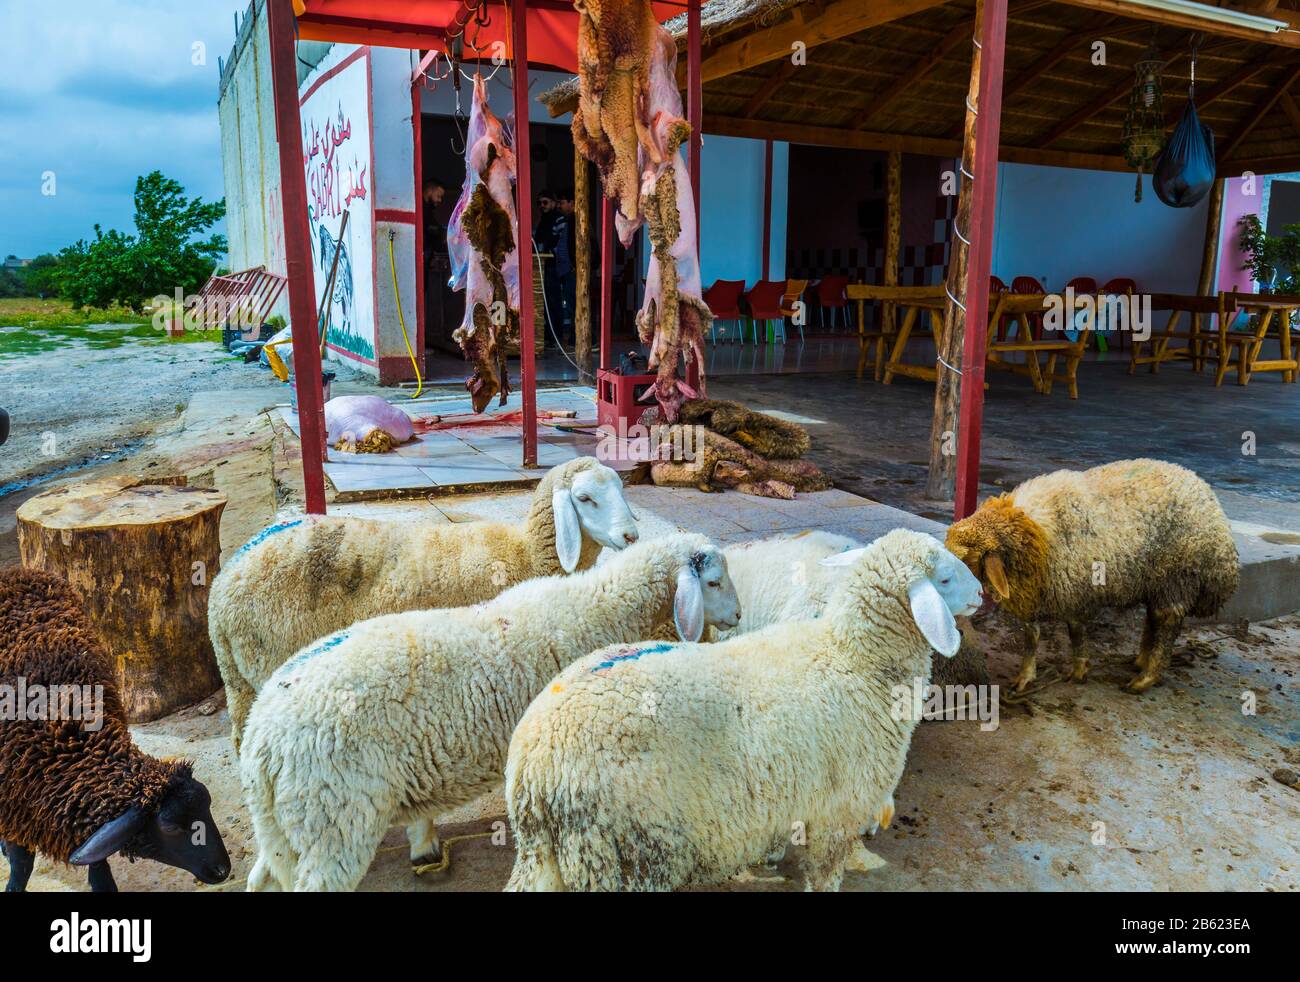 Lambs and hides in a local restaurant. Stock Photo